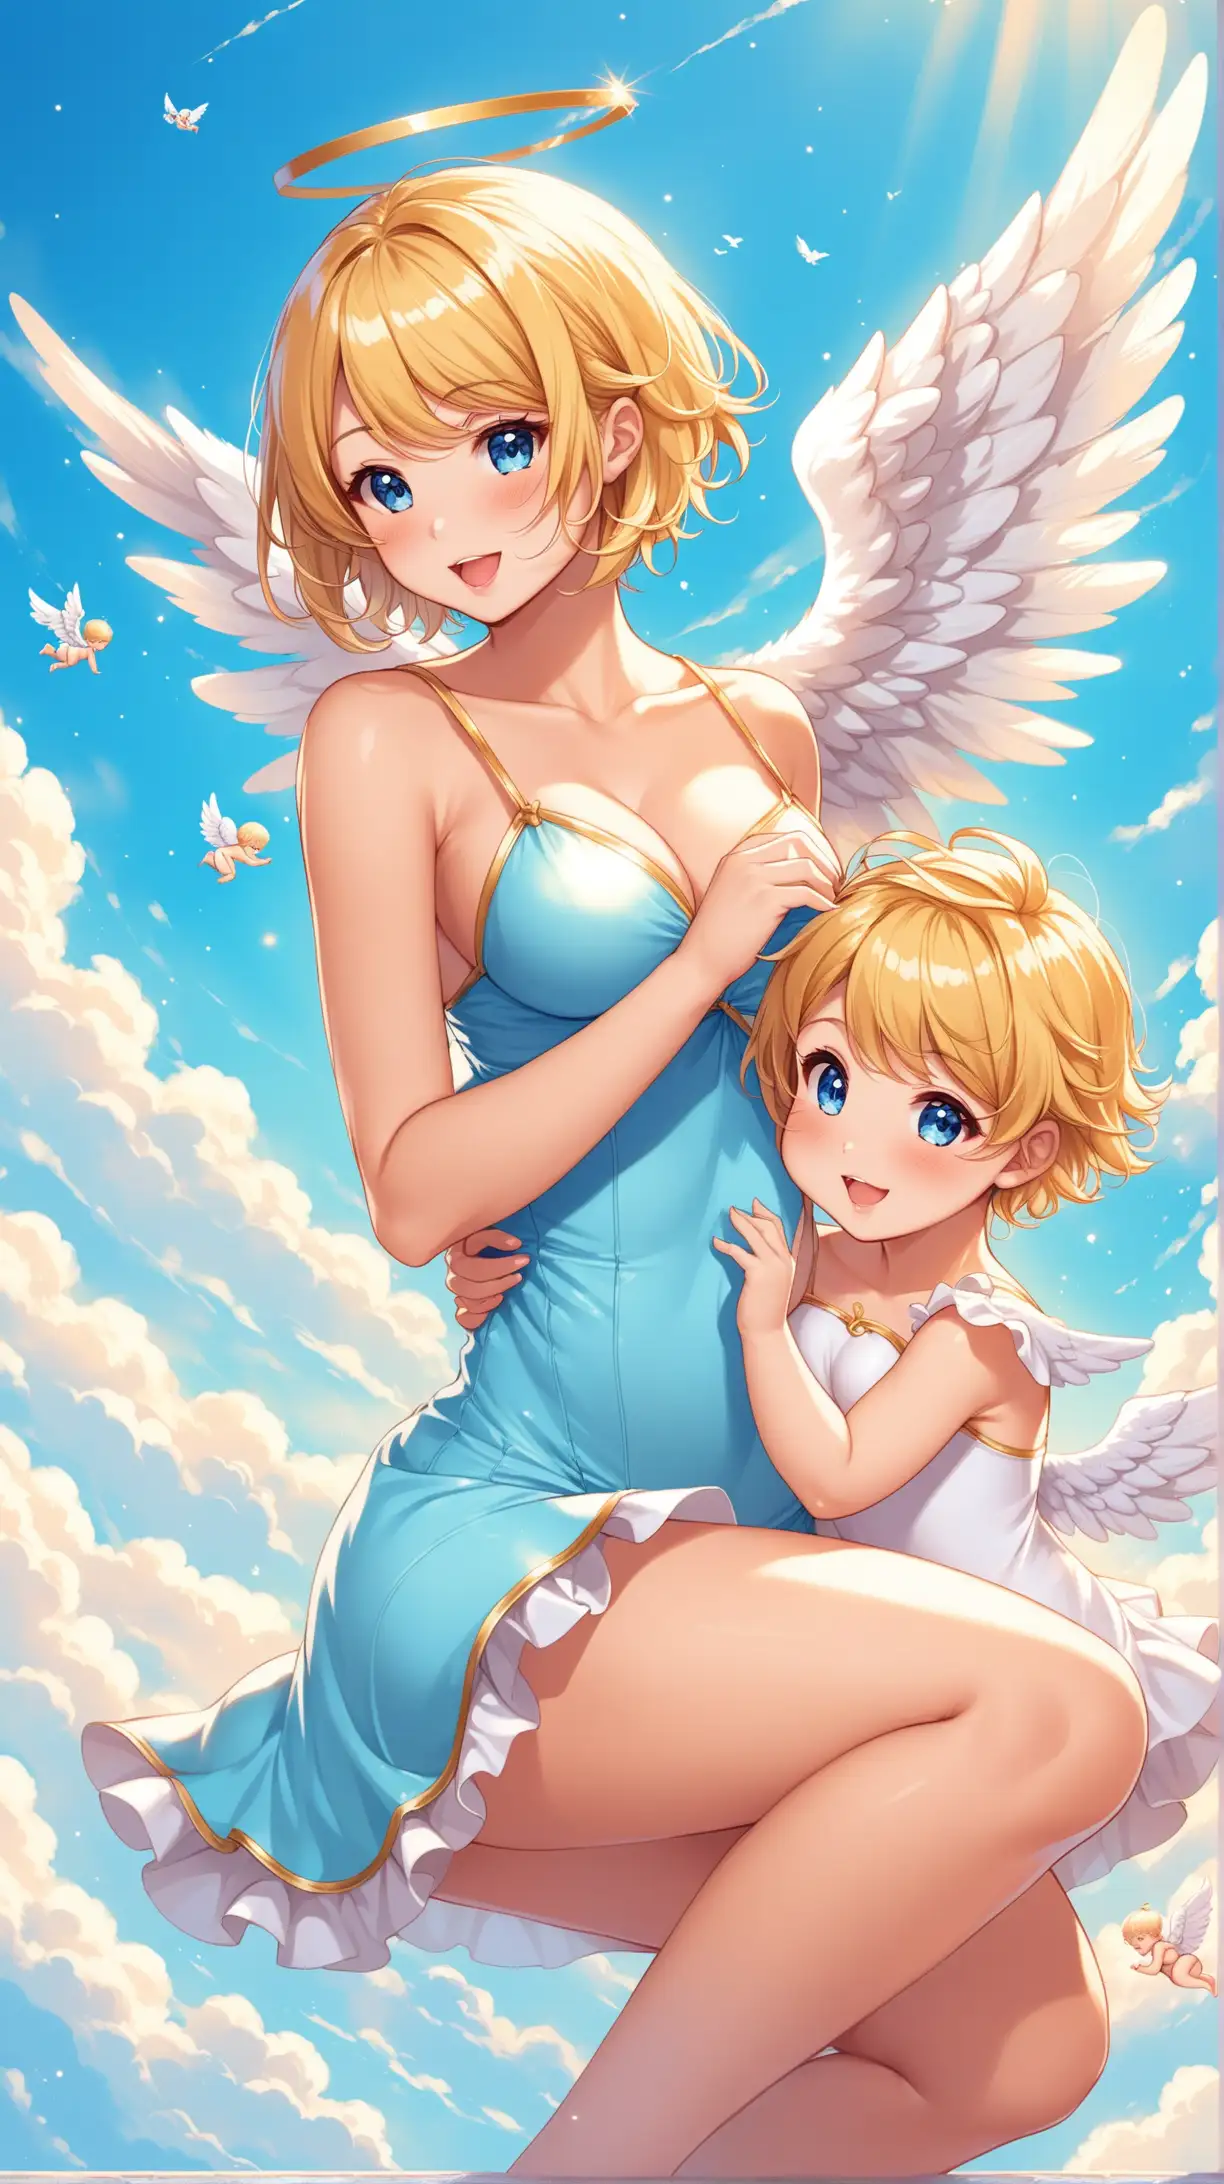 Sexy women  playing with little cupid, angel costume, playful, blond short hair, light blue short sexy dress, fantastic background .